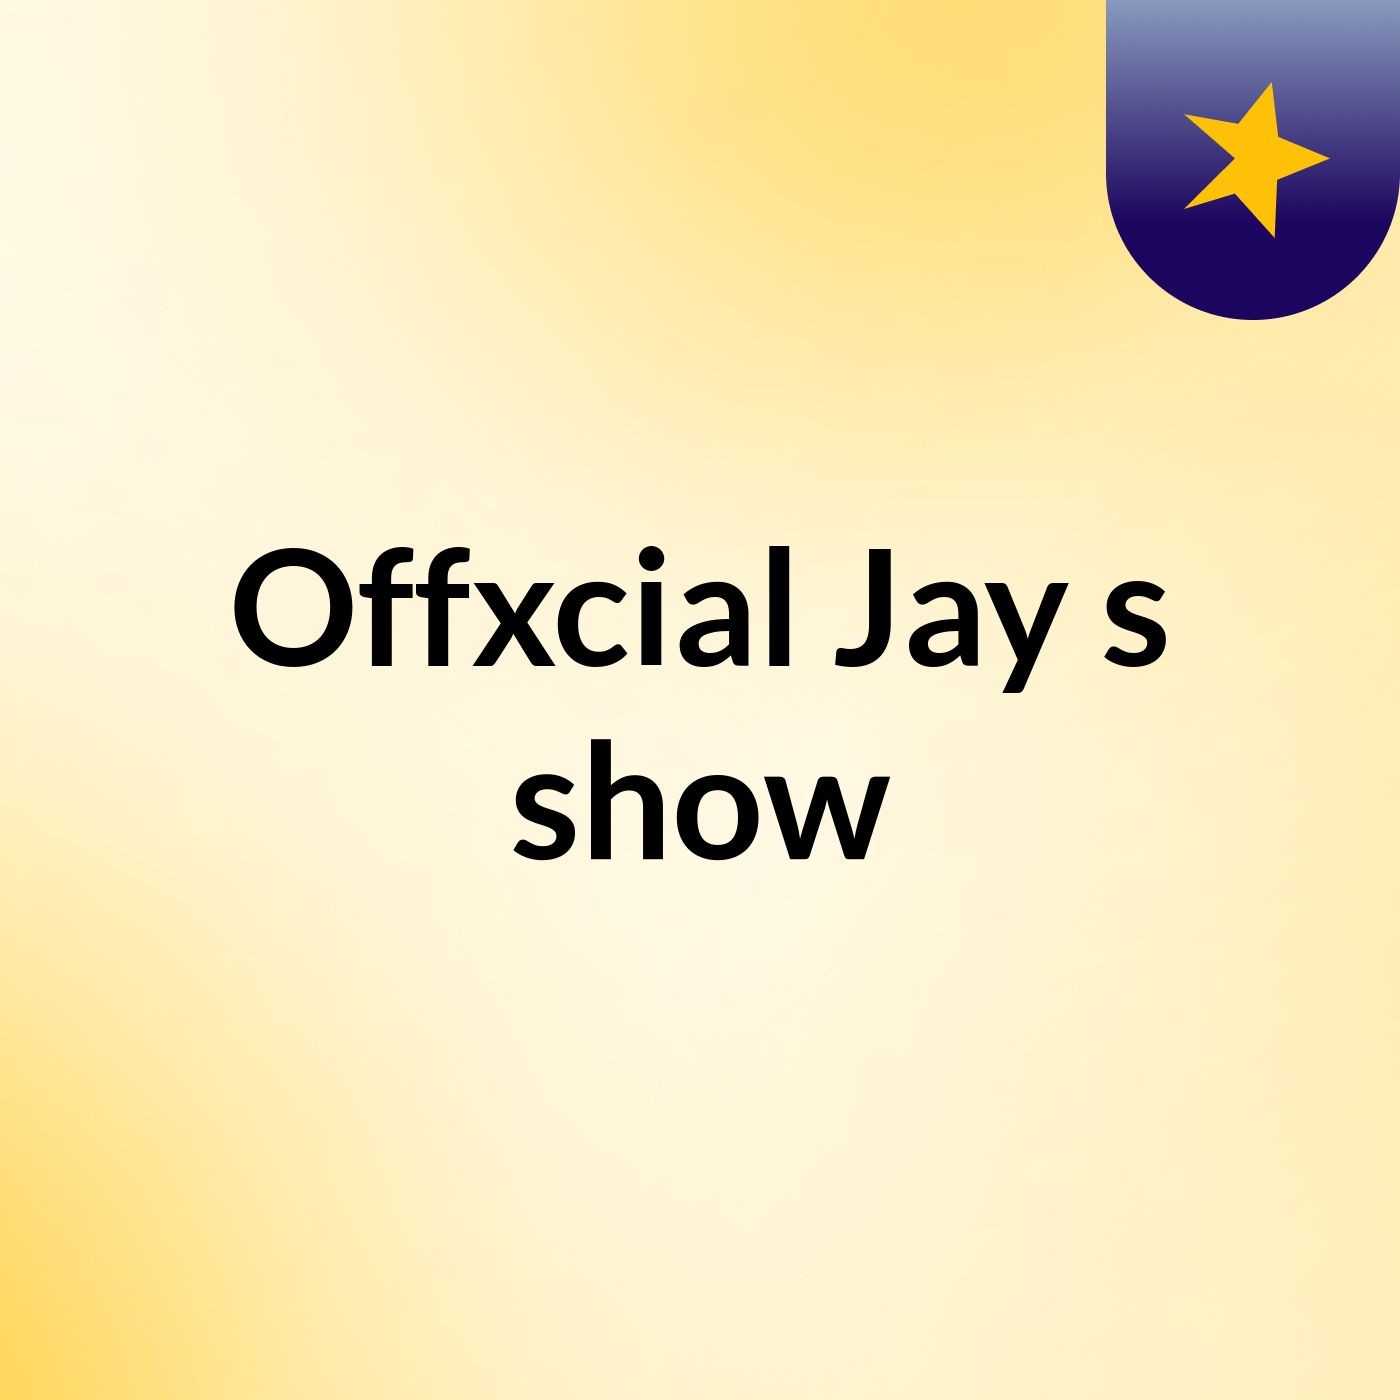 Offxcial Jay's show